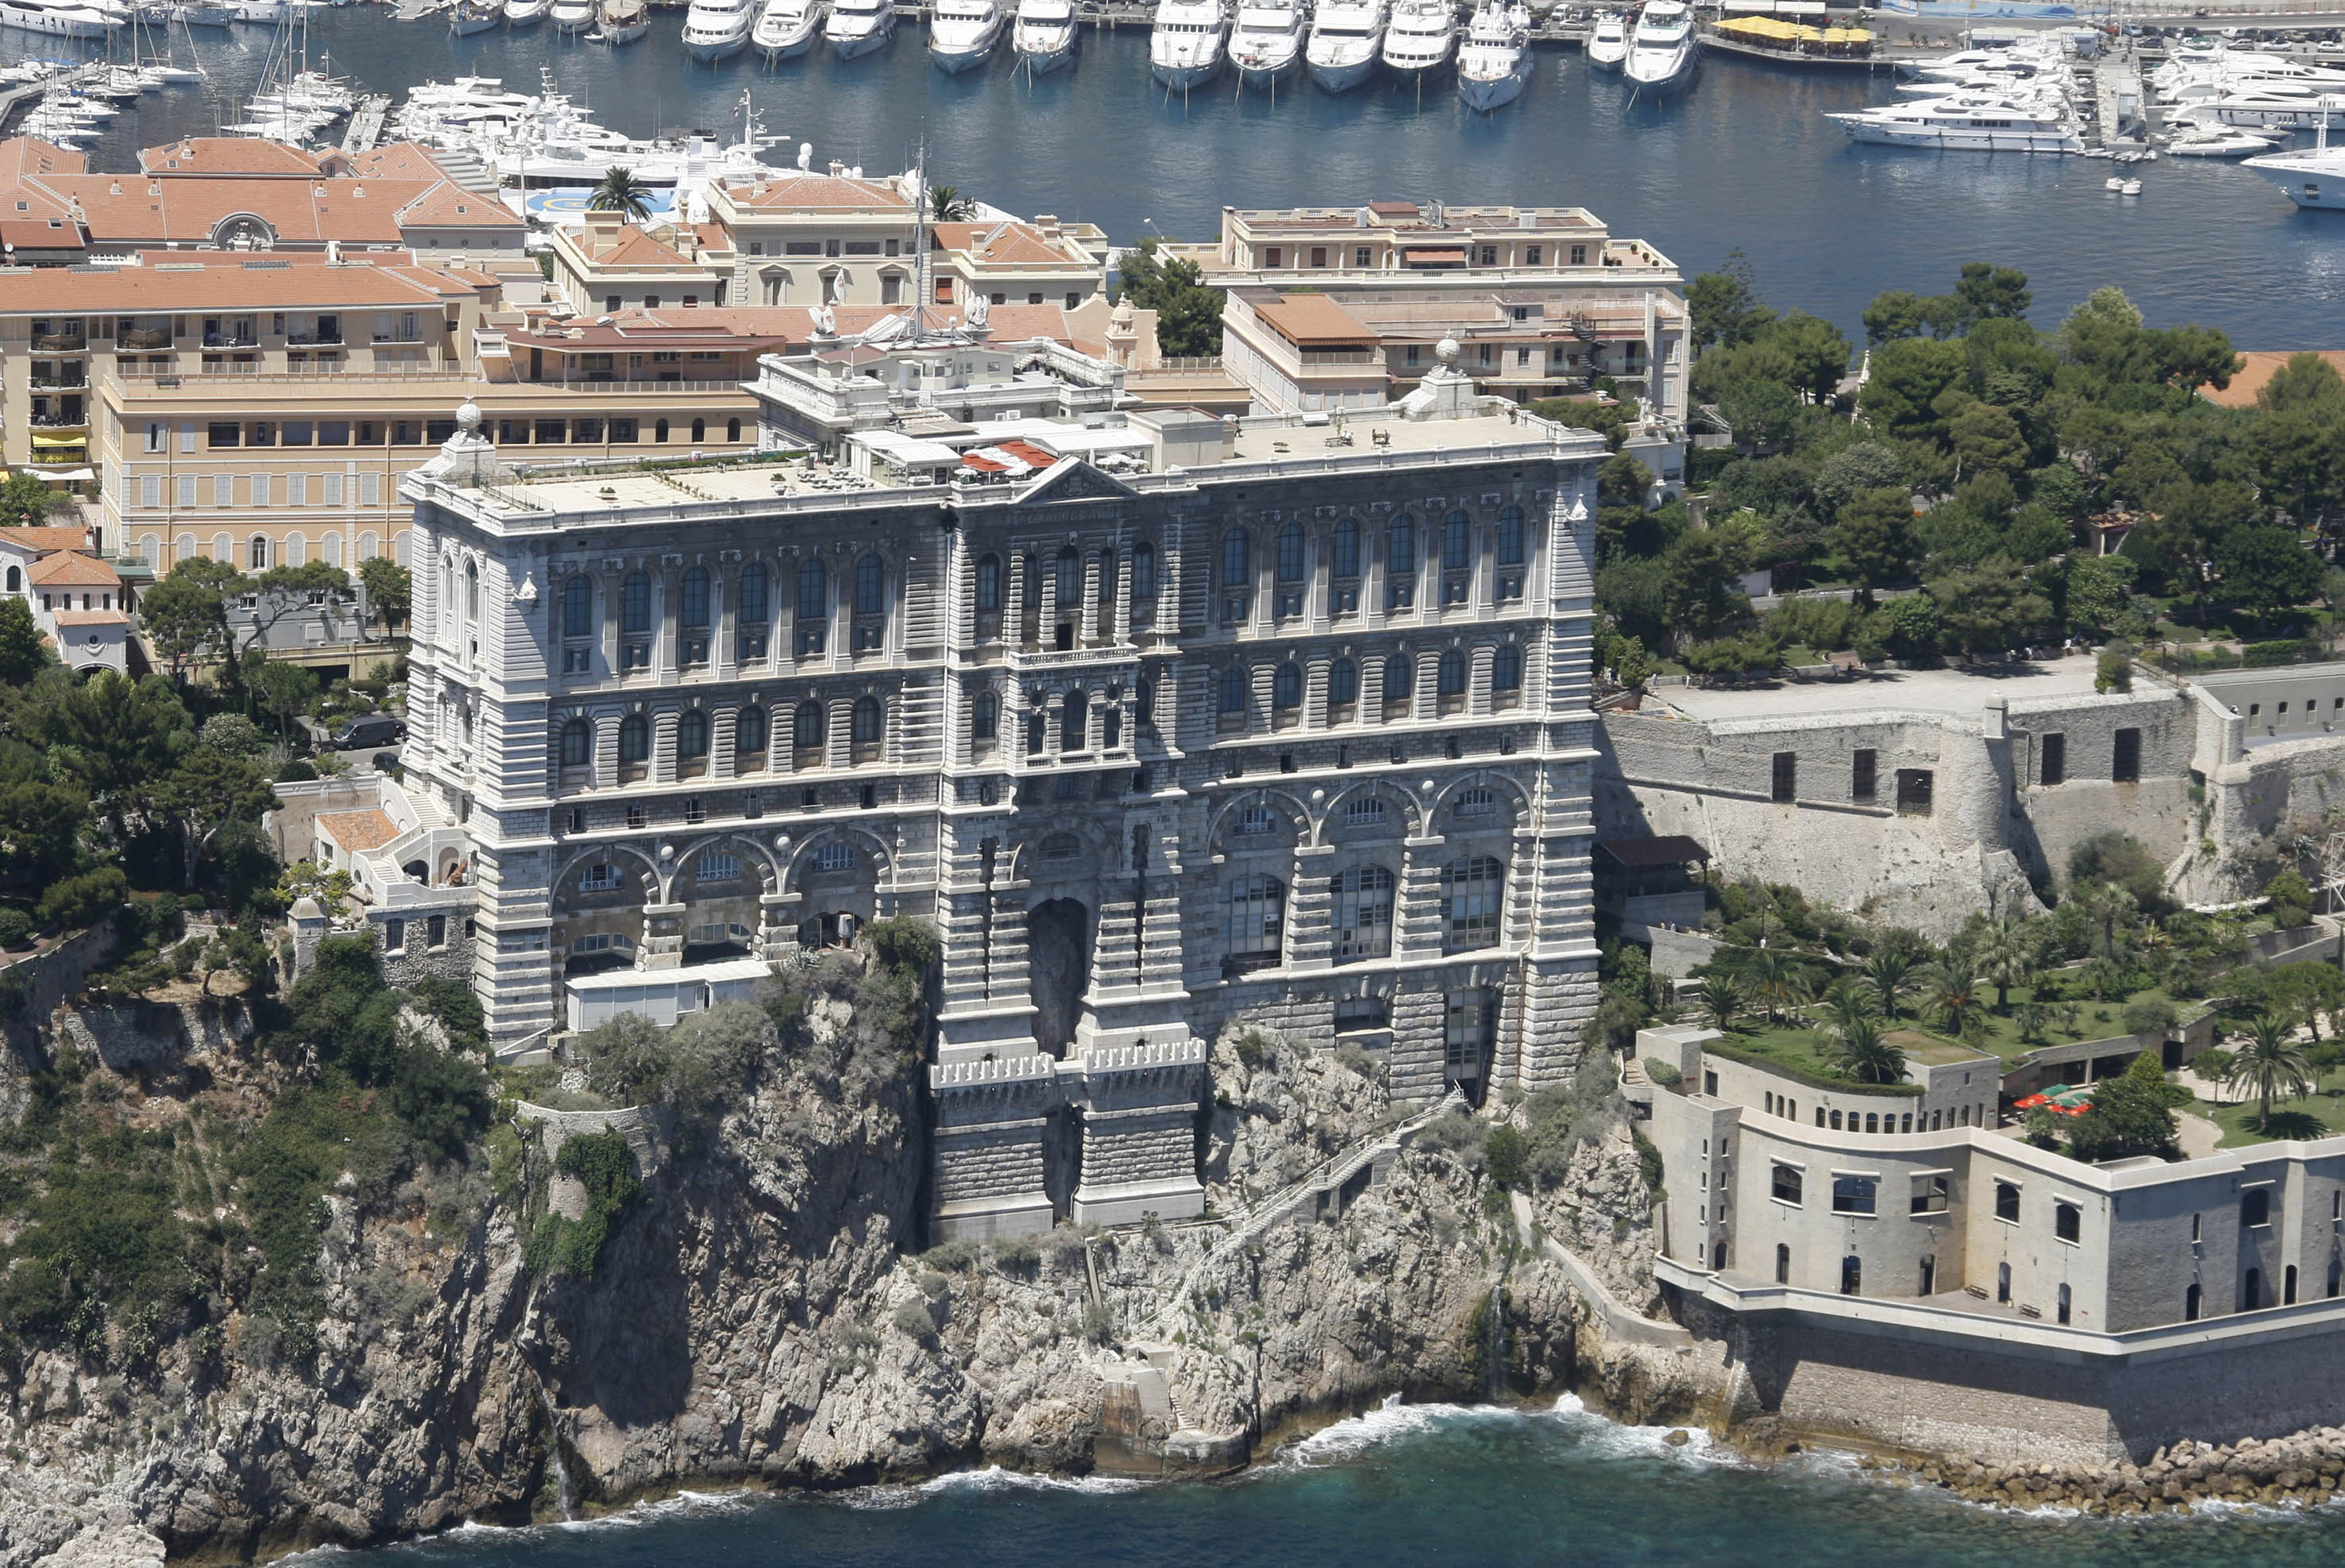 Monaco Now - A museum to help and protect ocean